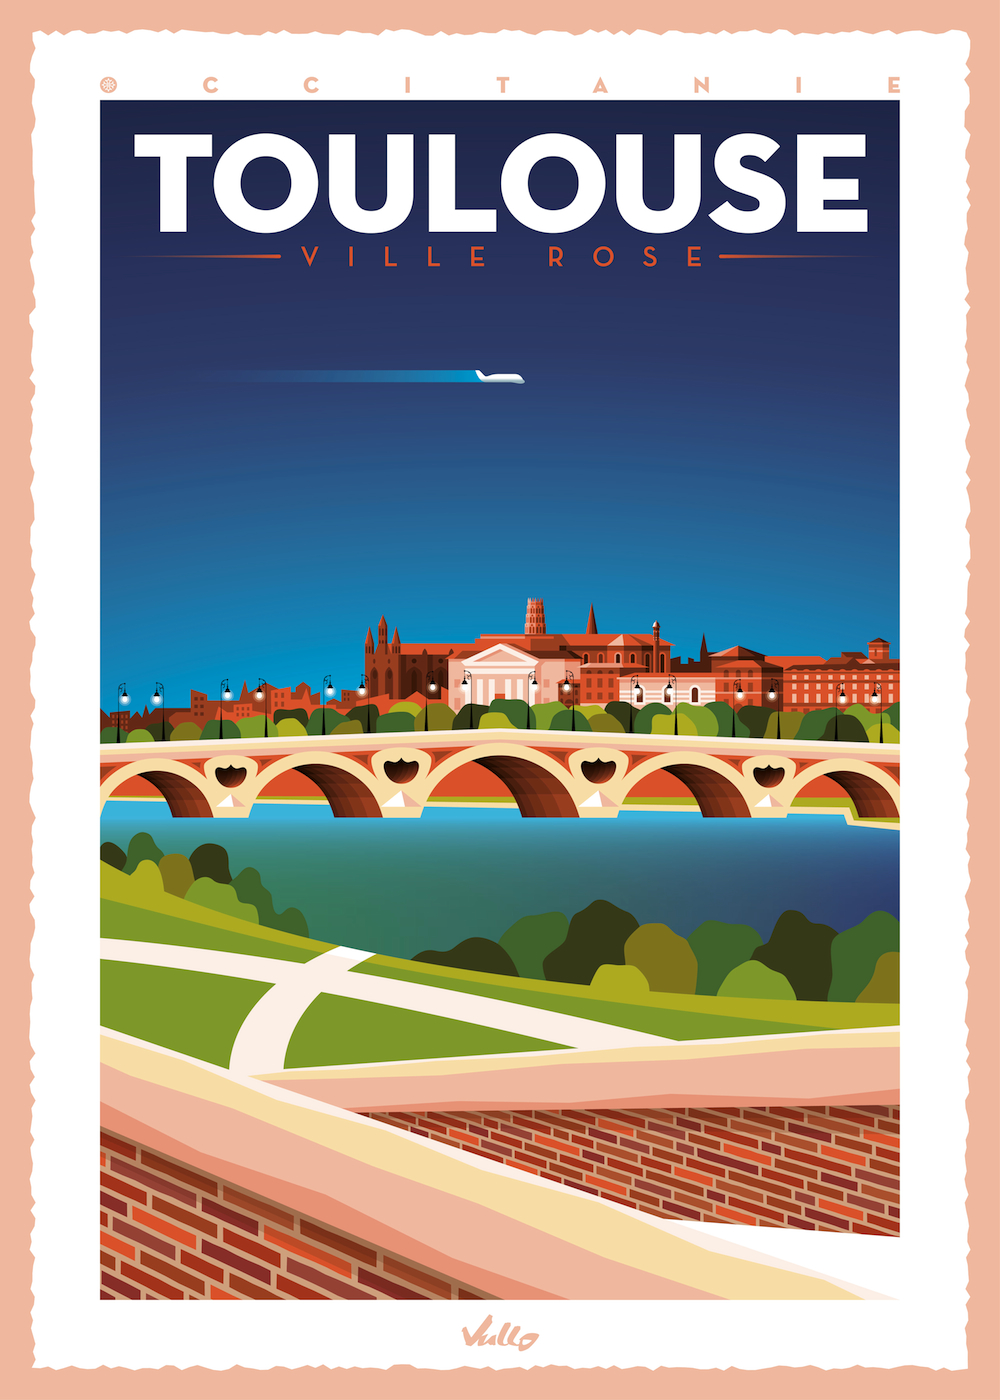 Toulouse poster